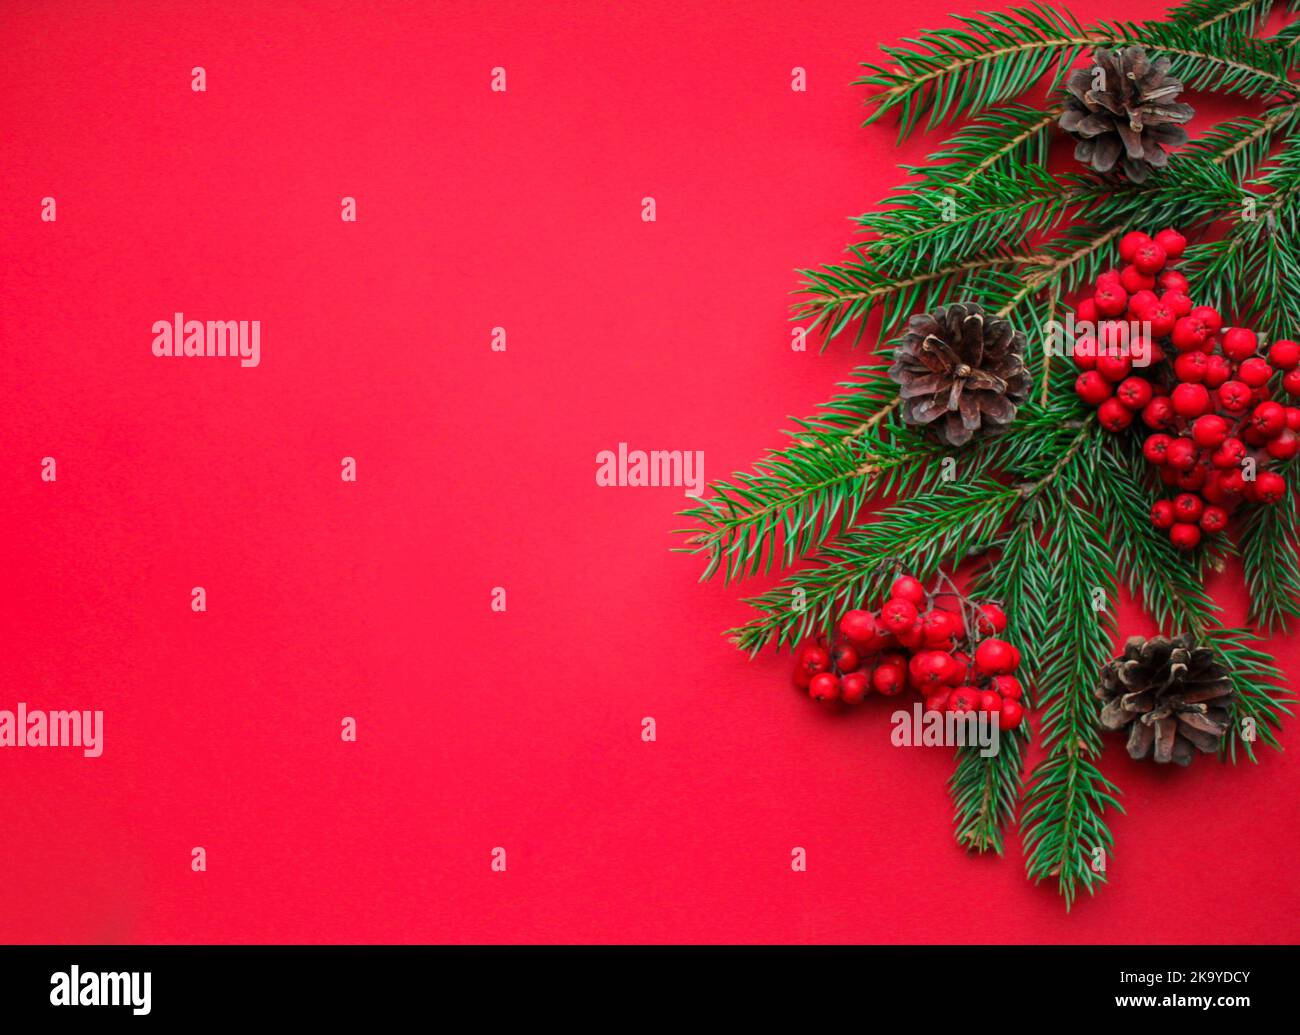 The spirit of Christmas, nature decorations: fir branches, cones, bright red Rowan berries on a bright red background with space for text Stock Photo